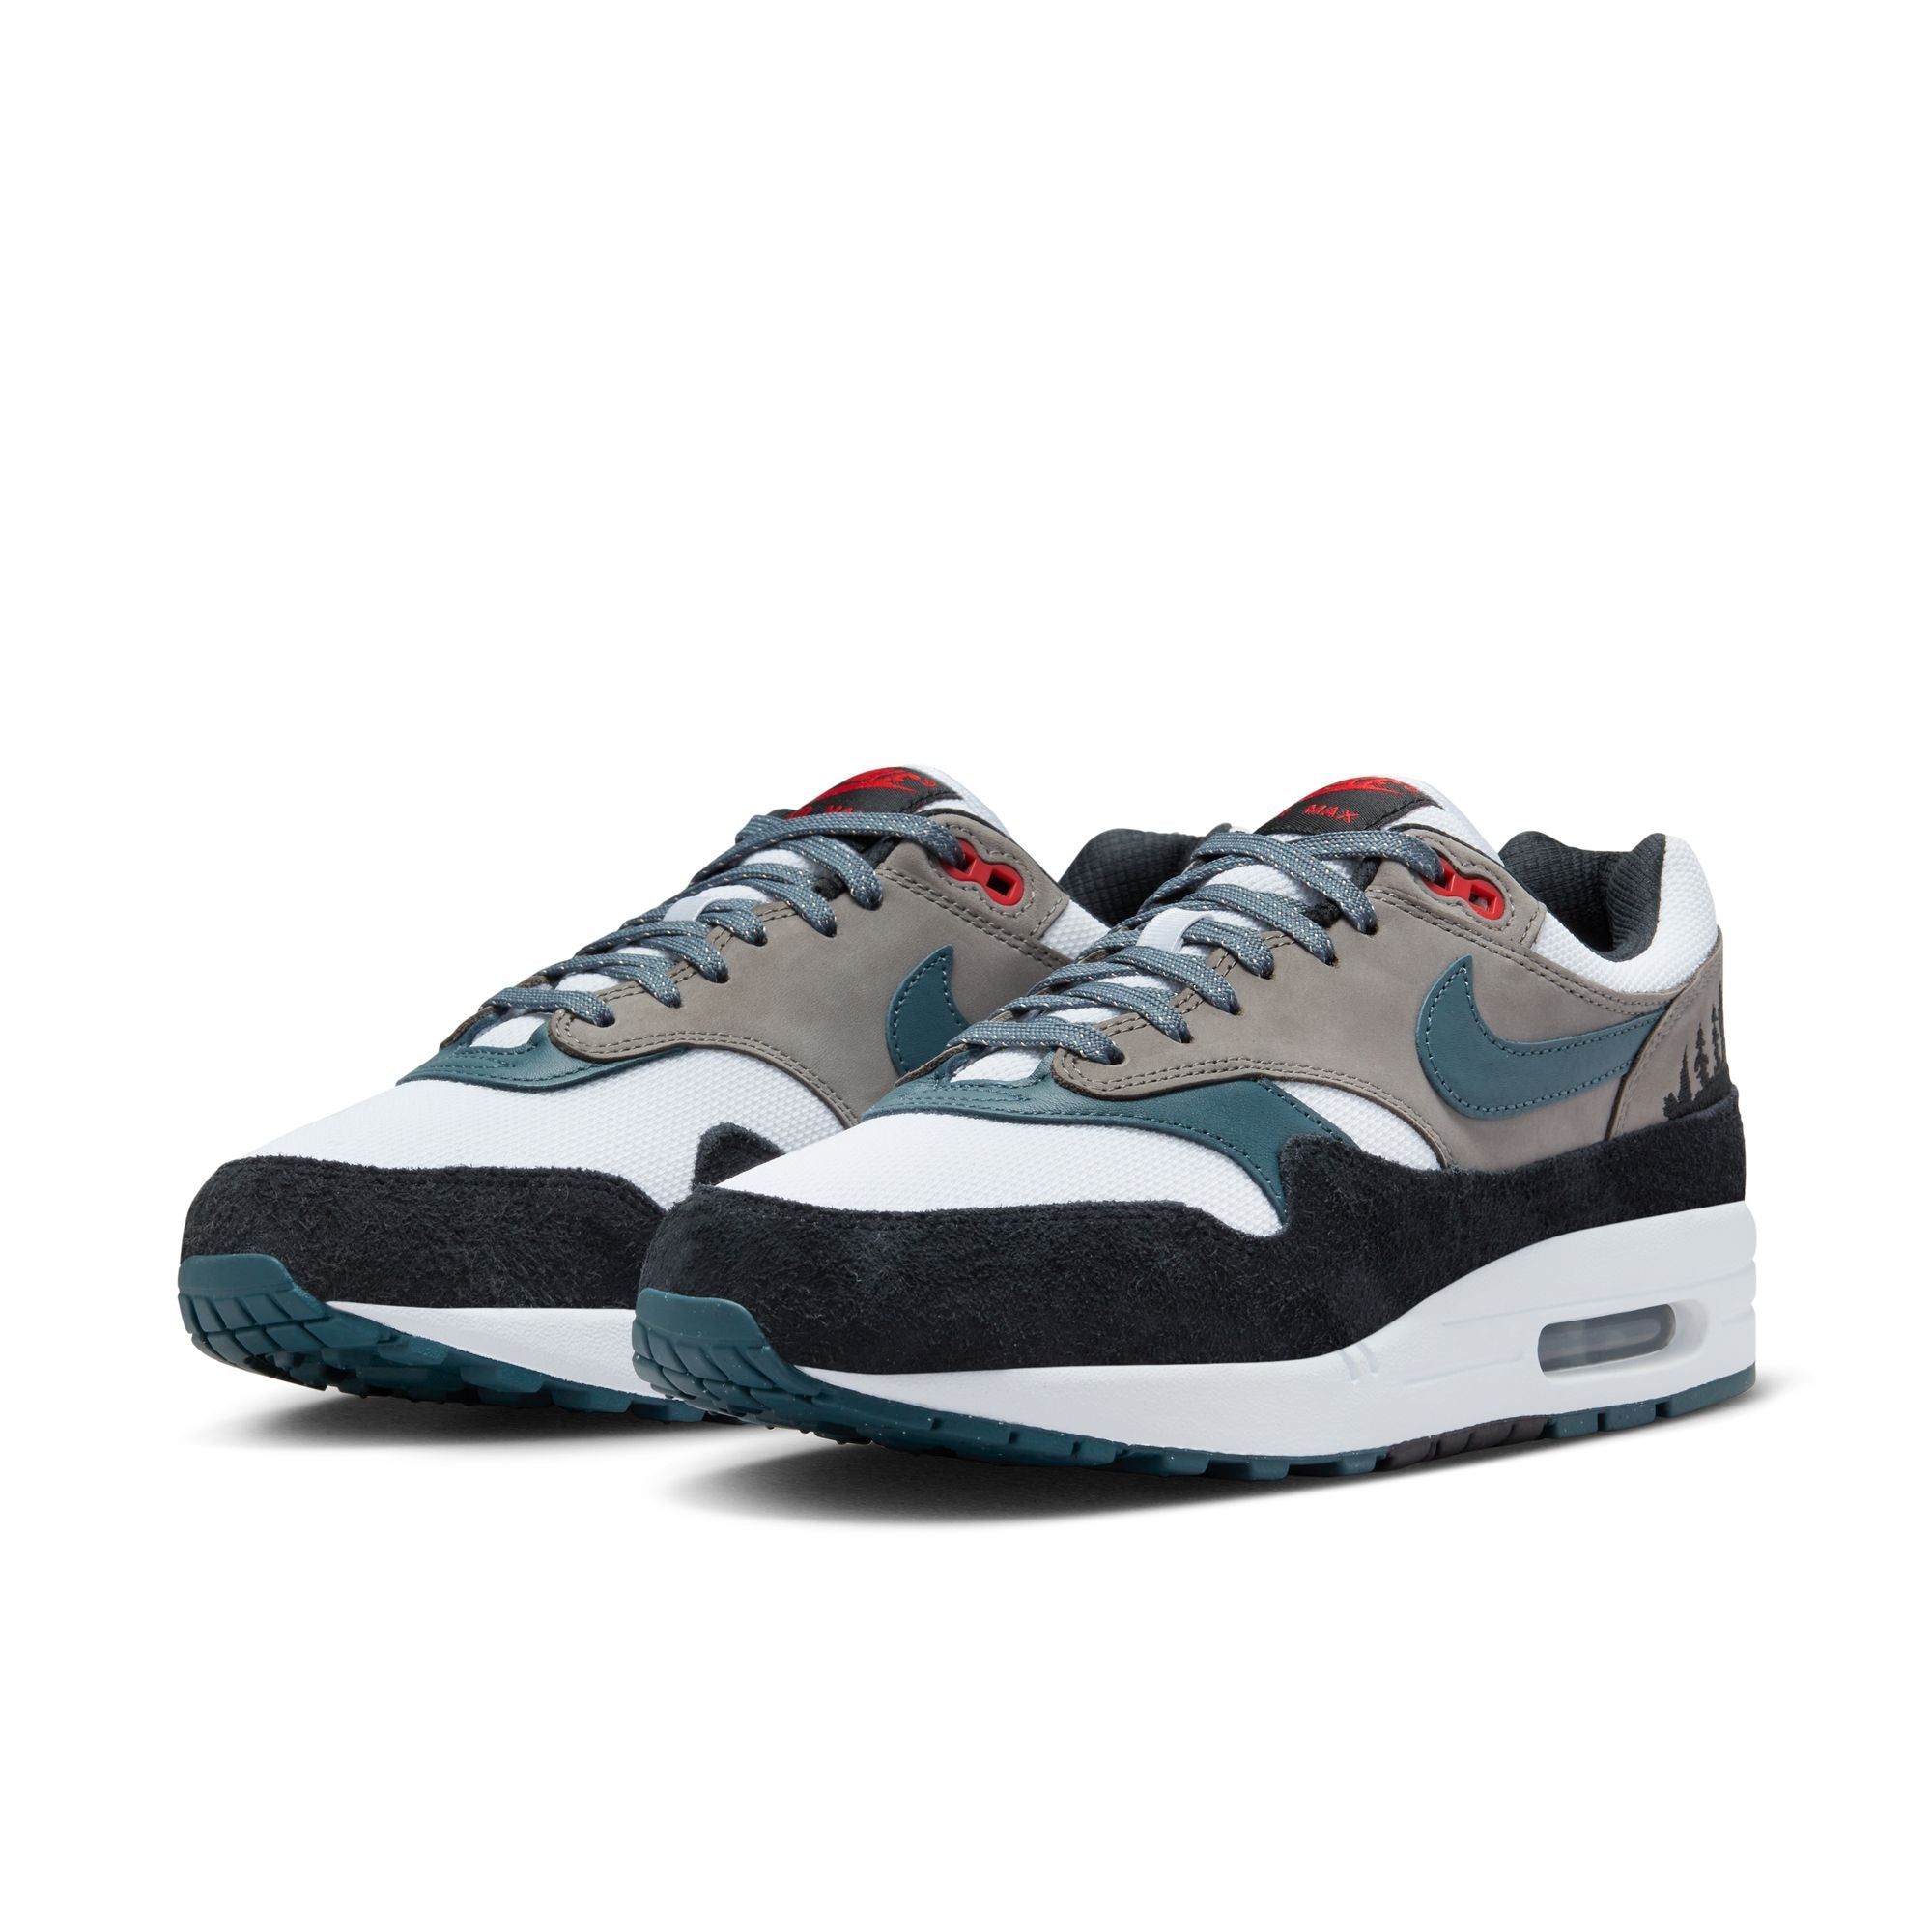 NIKE AIR MAX 1 PRM – UNDEFEATED JAPAN